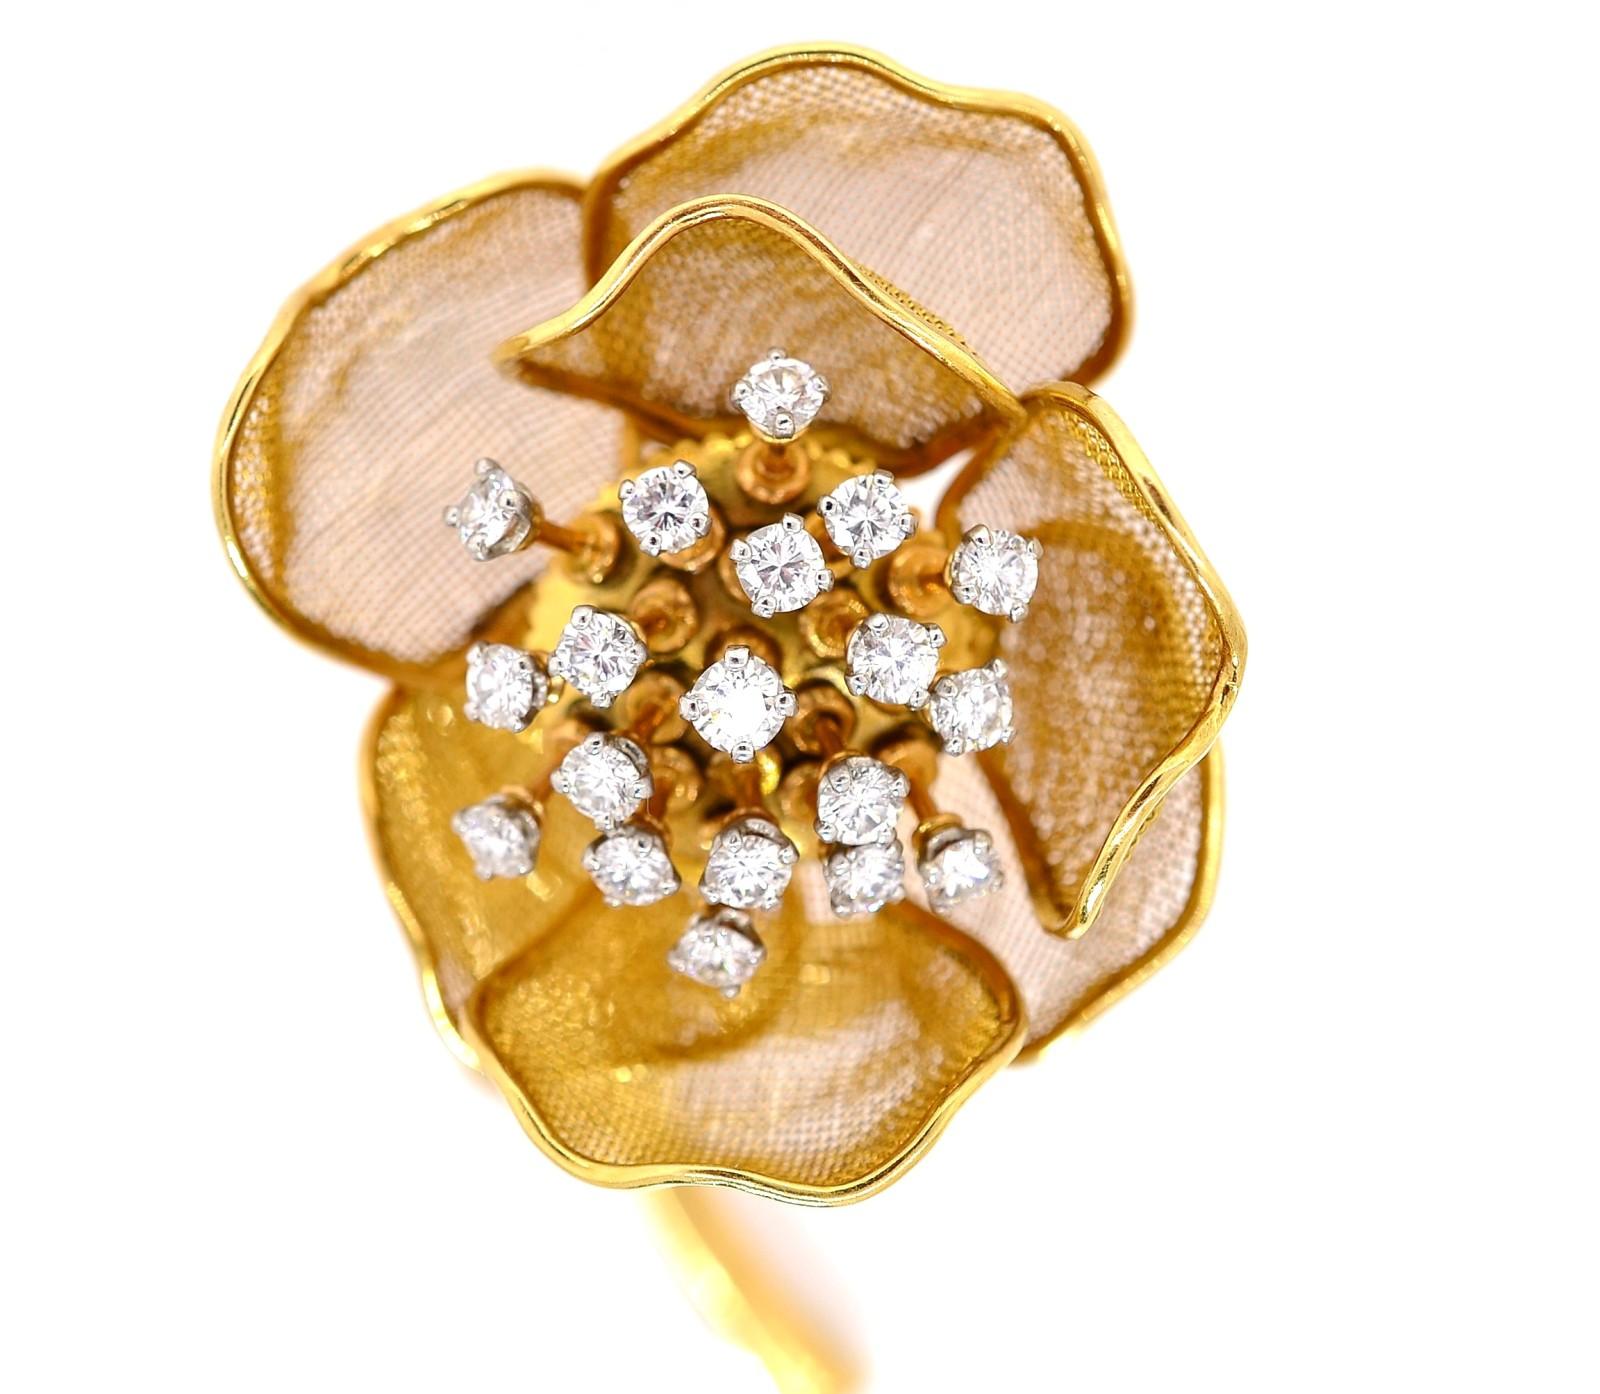 Cartier France Diamond and Gold Vintage Brooch 1